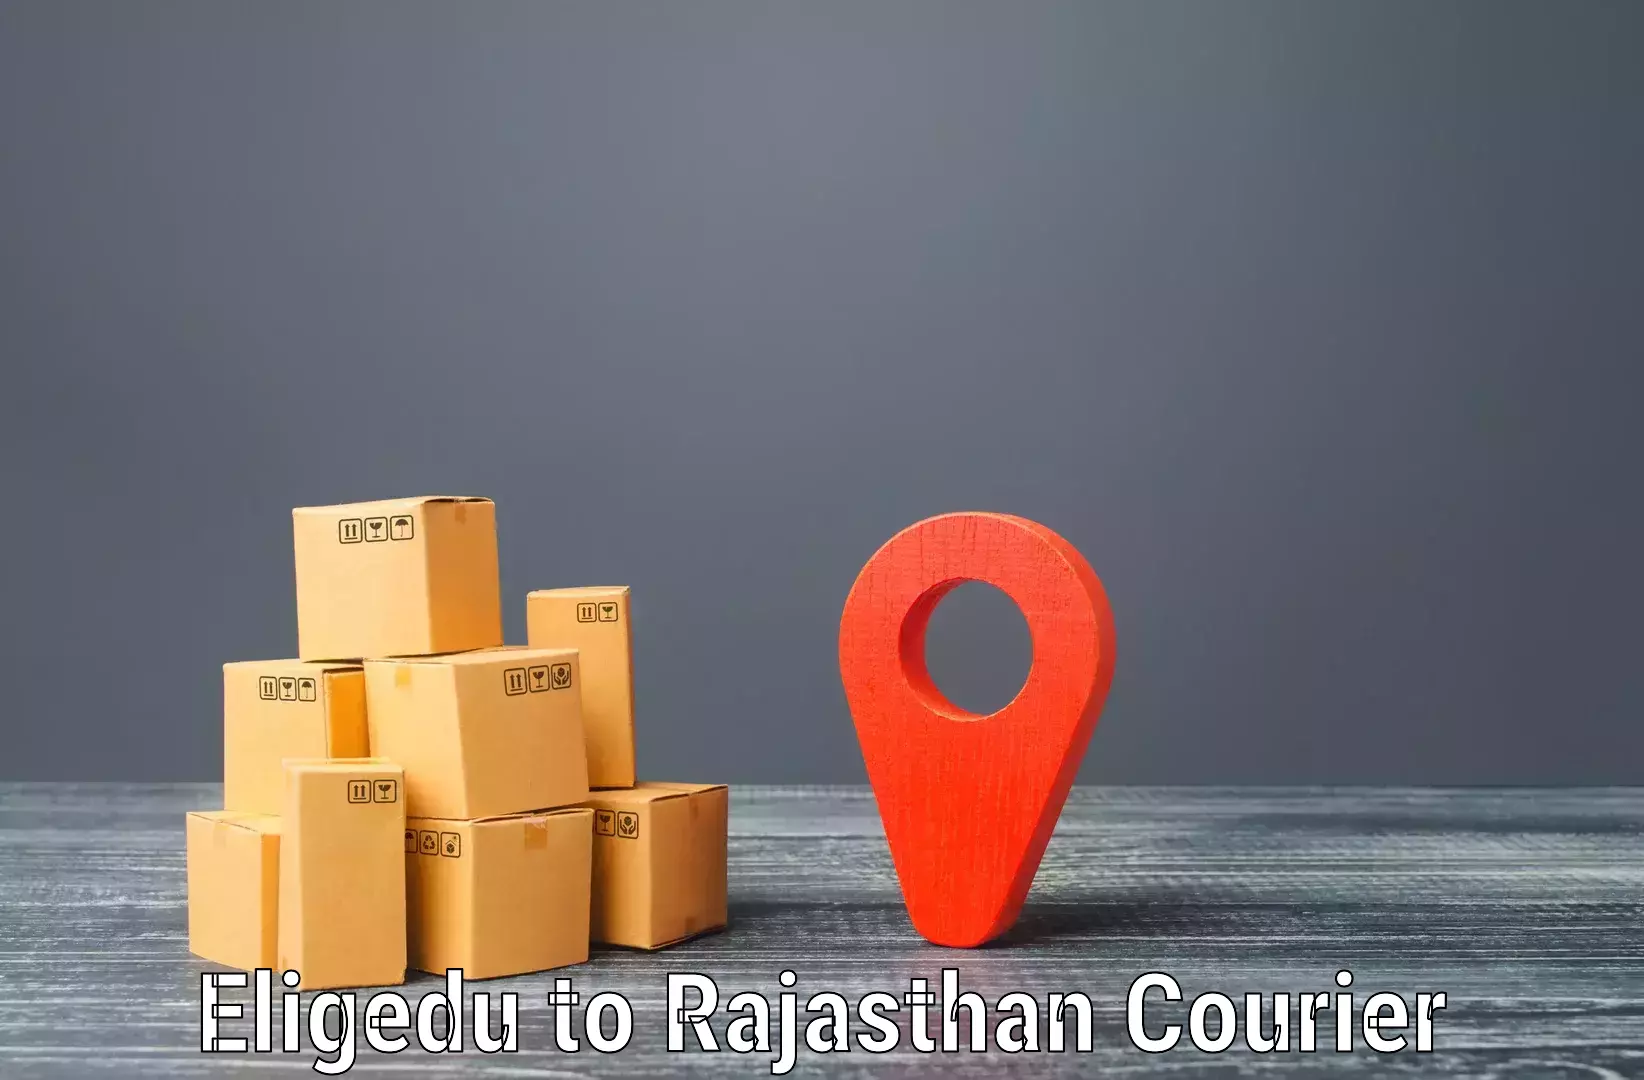 Business shipping needs in Eligedu to Rajasthan